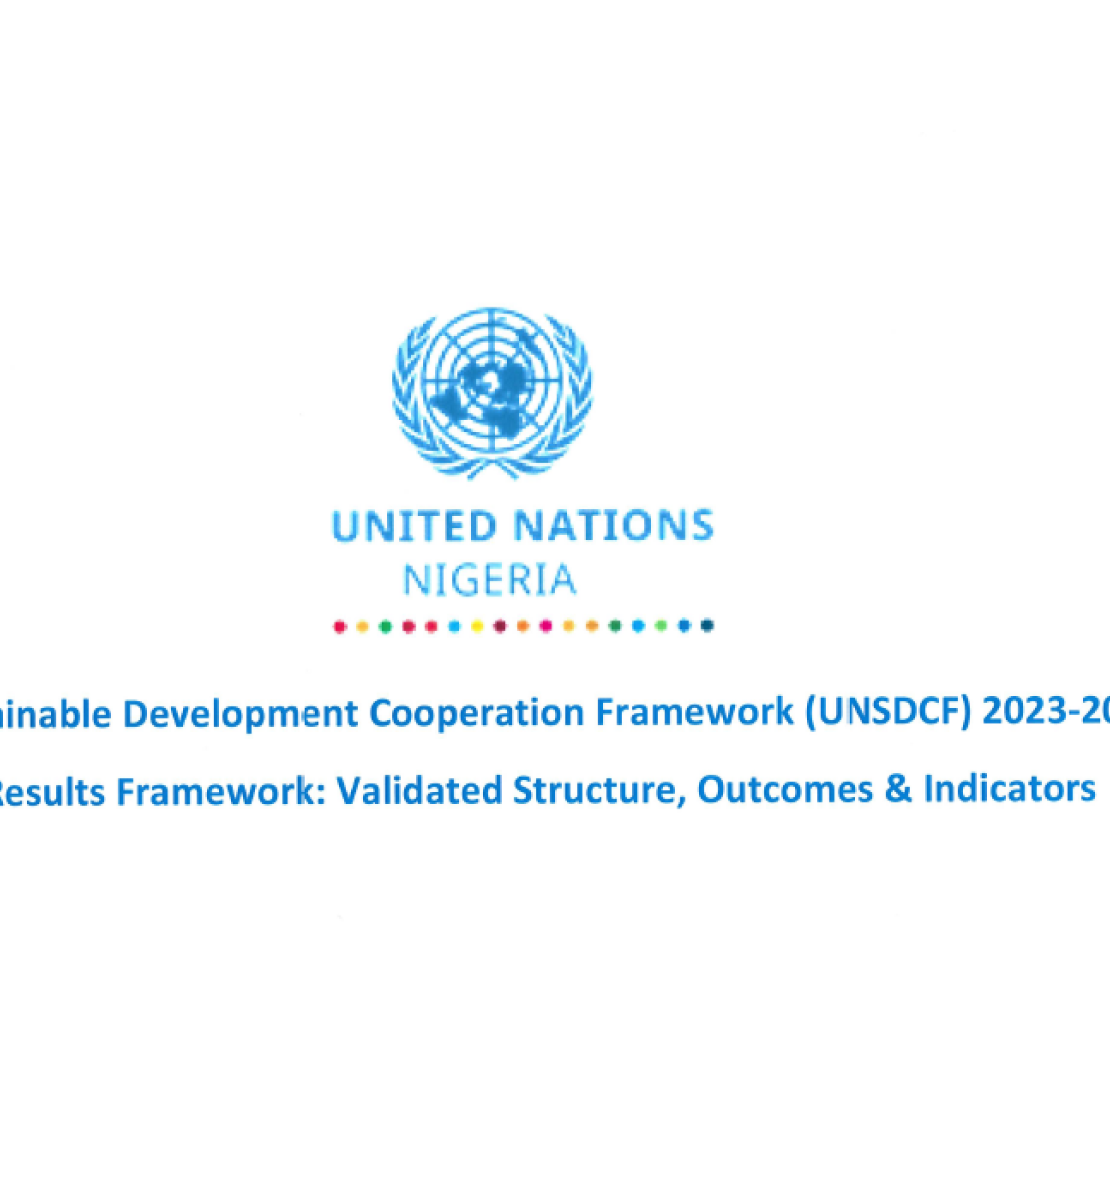 This is a white document with blue text and the UNCT logo. 